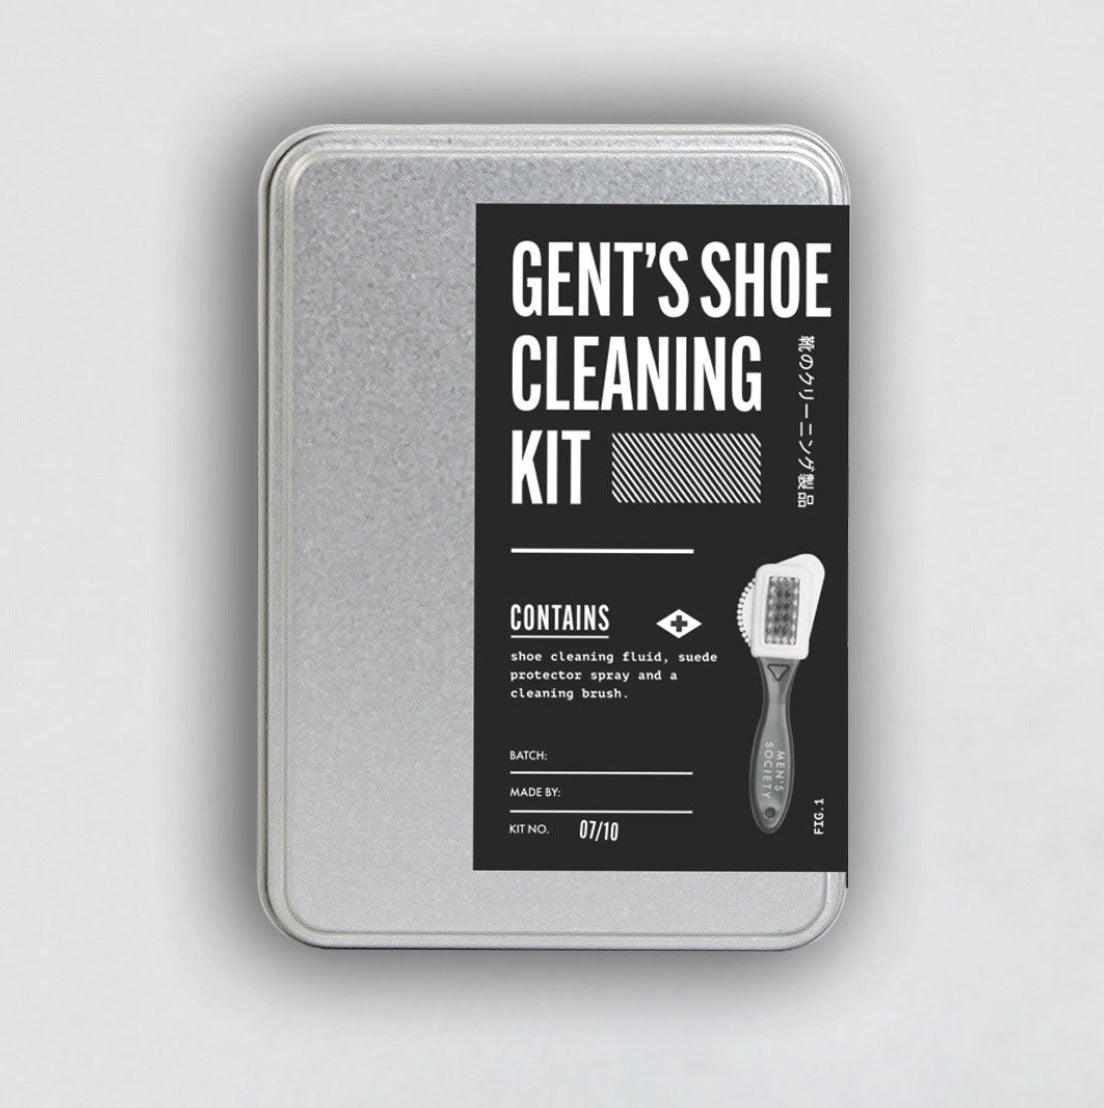 Gent's Shoe Cleaning Kit